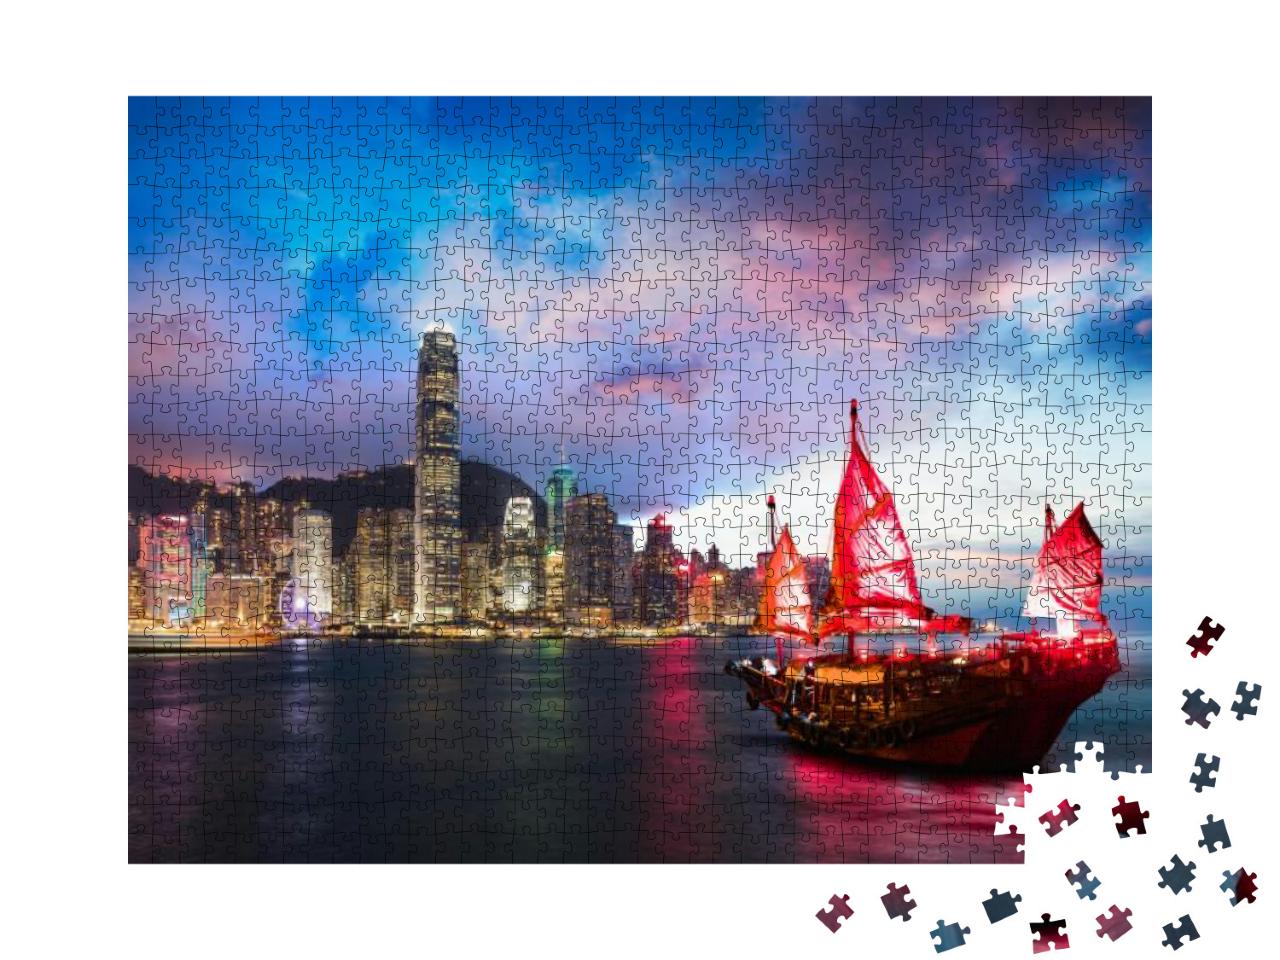 Puzzle 1000 Teile „Dschunke im Victoria Harbour, Hongkong“